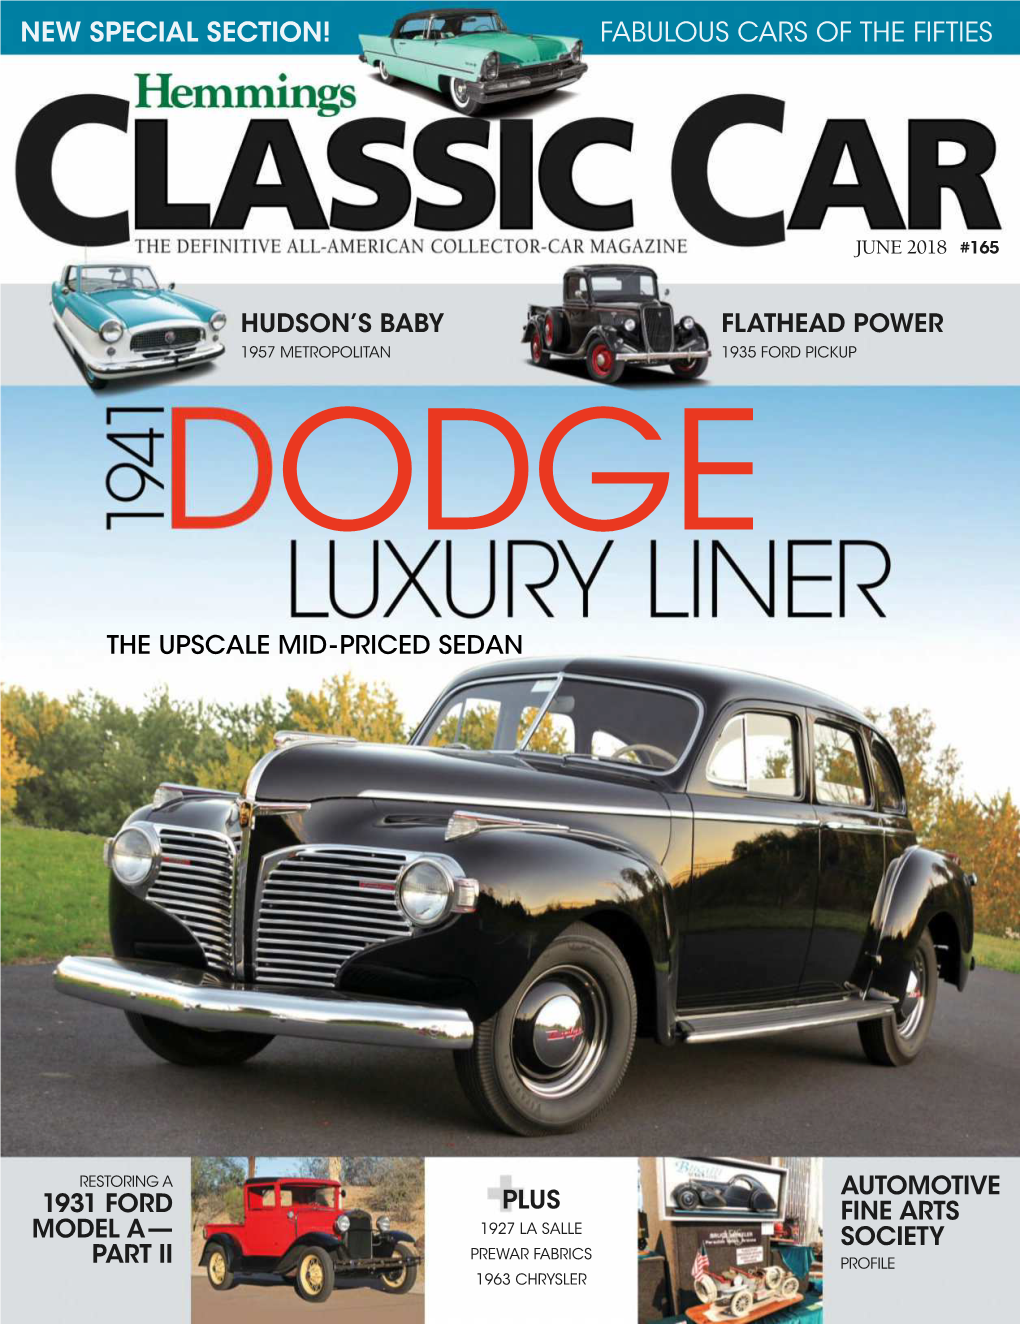 New Special Section! Fabulous Cars of the Fifties